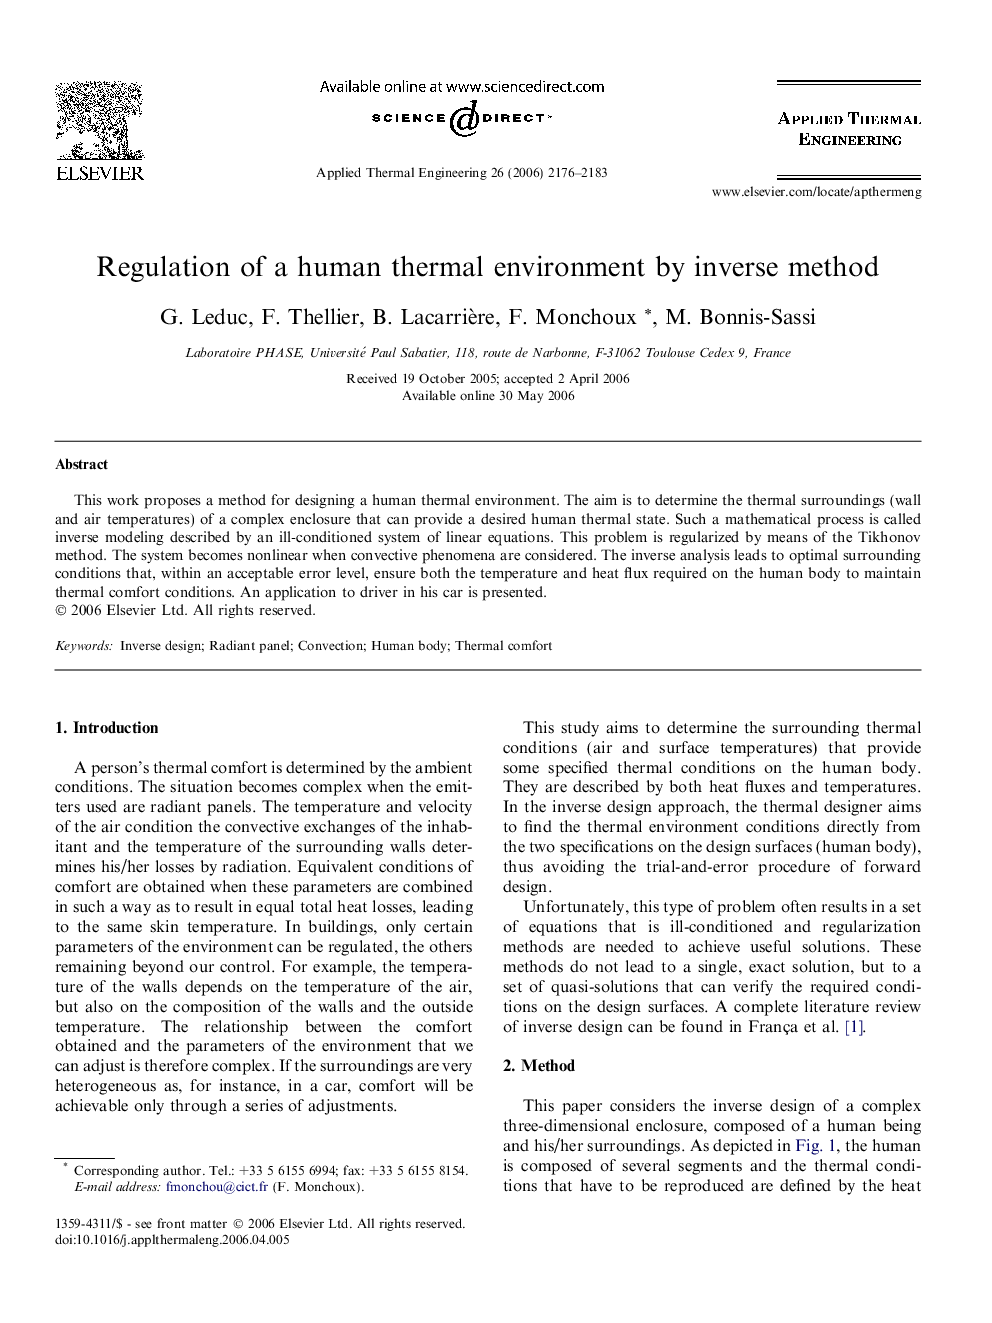 Regulation of a human thermal environment by inverse method